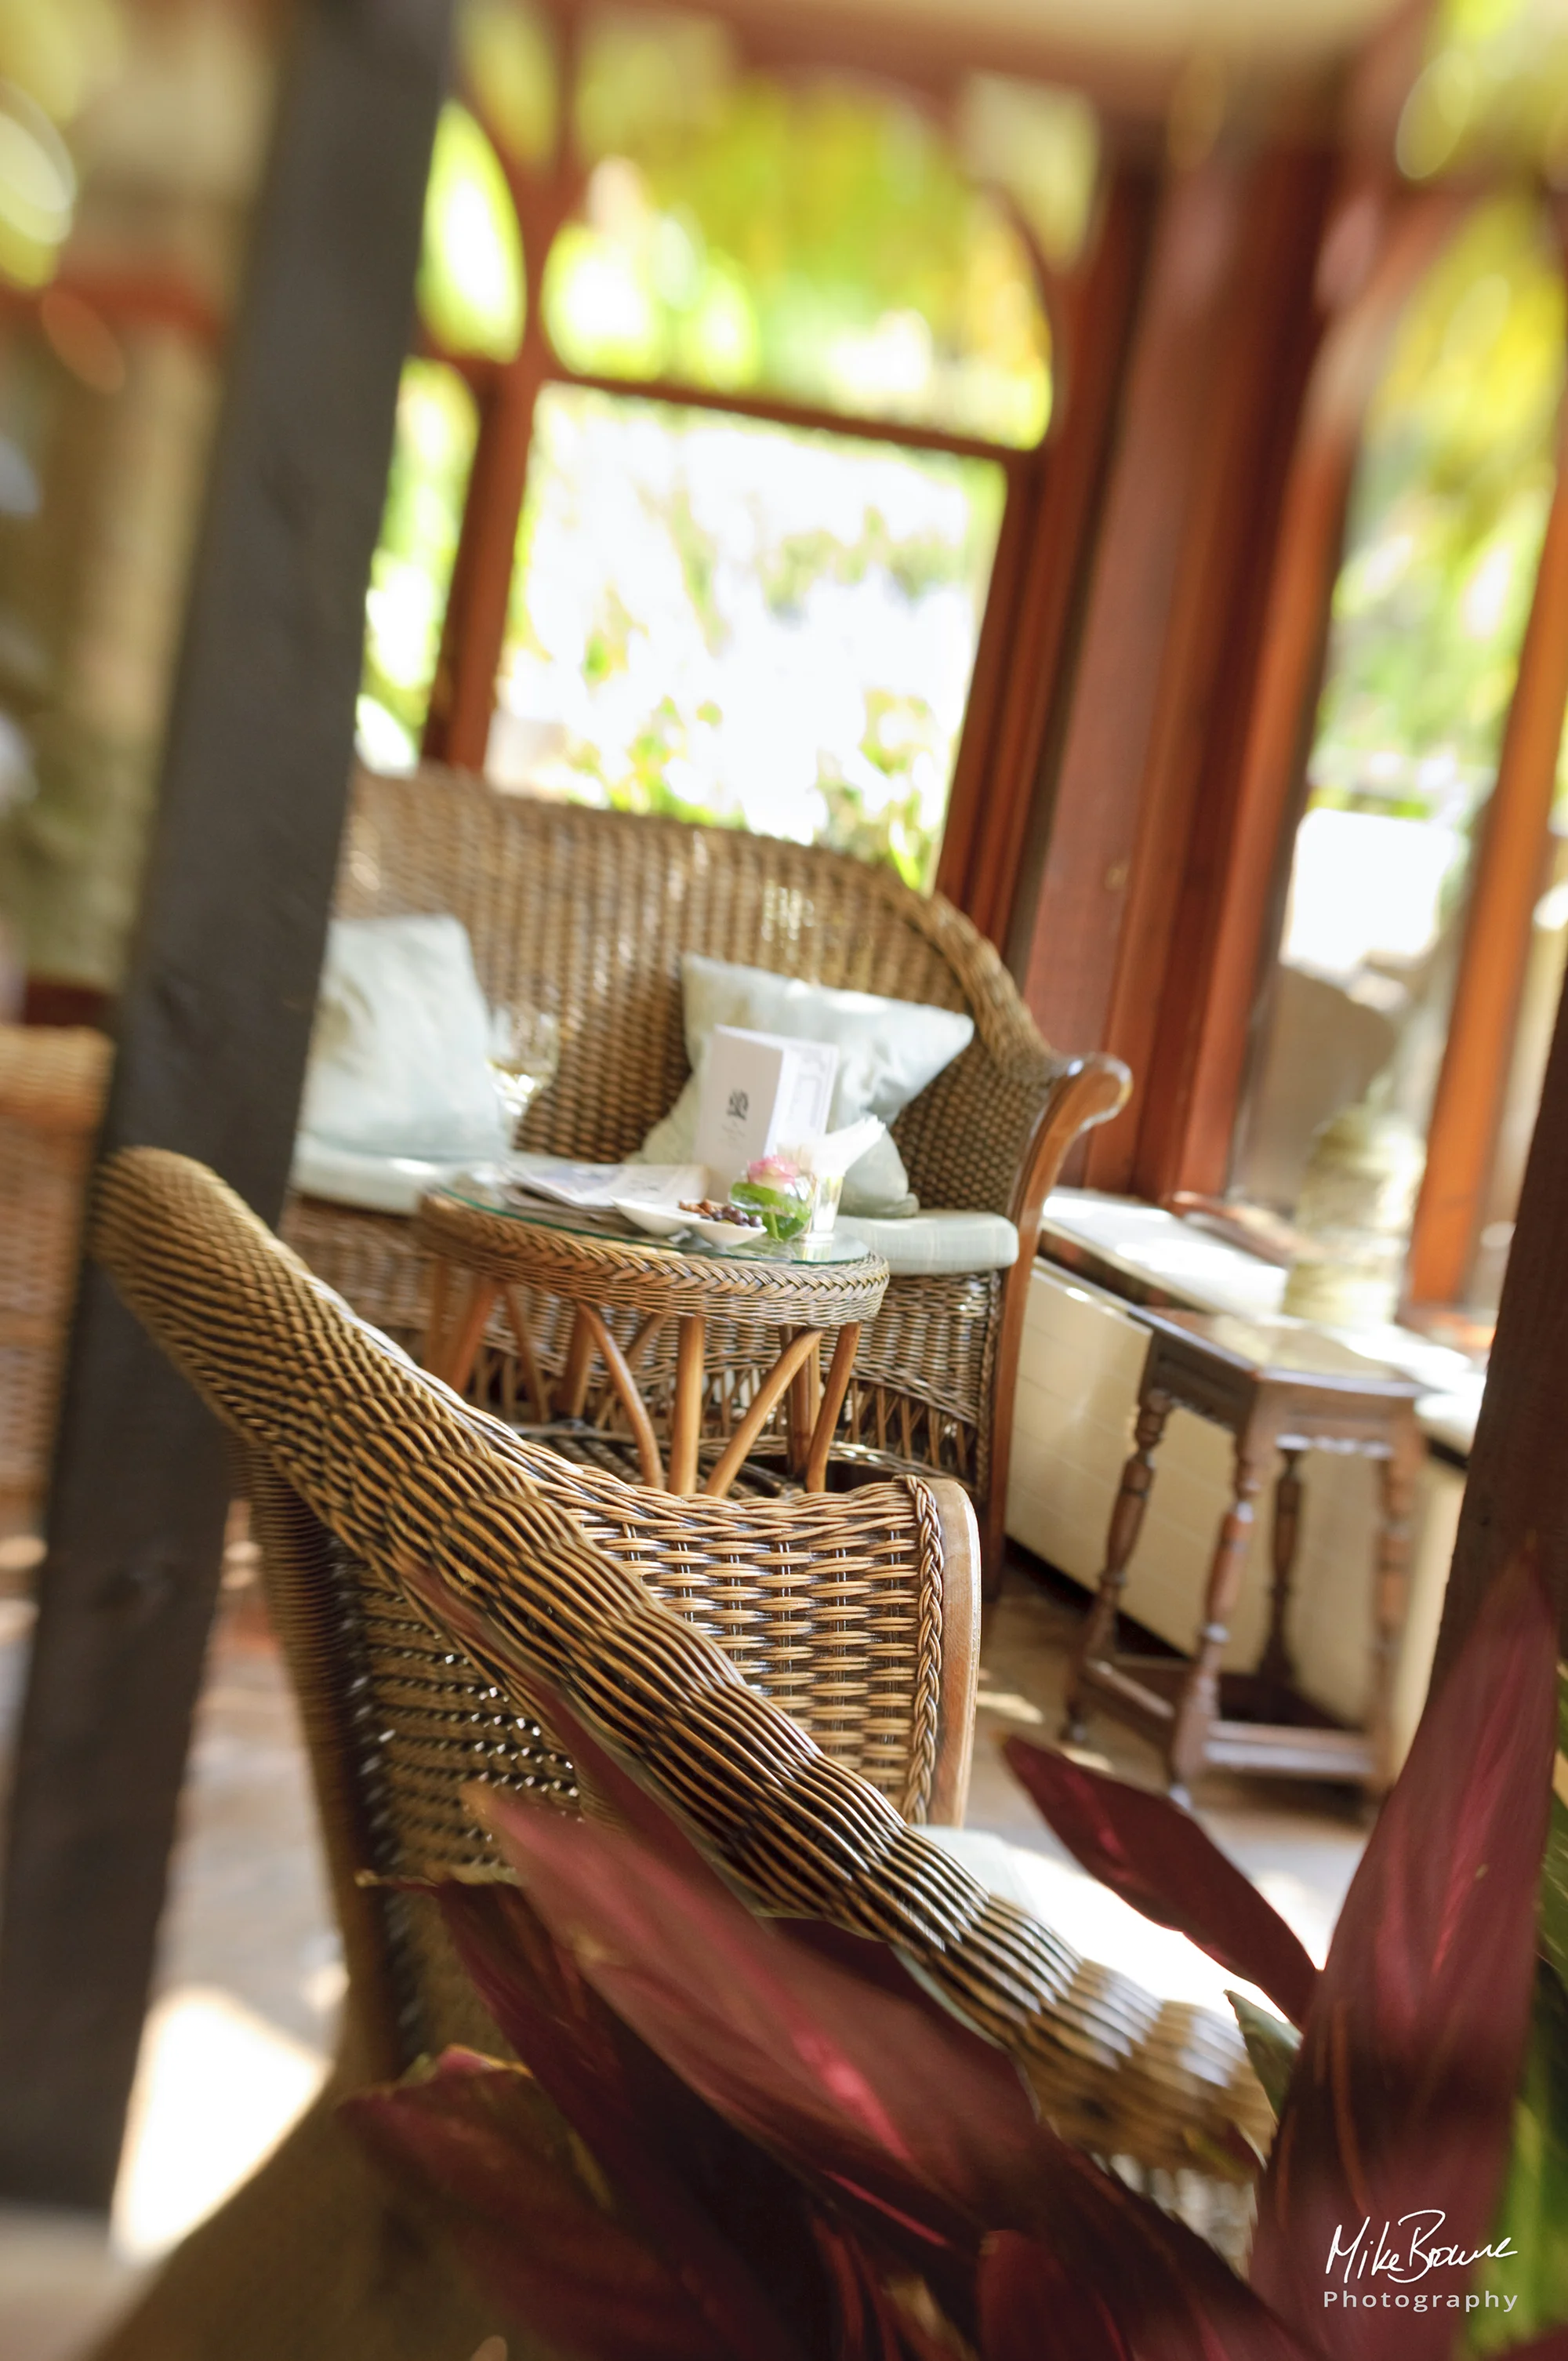 Wicker chairs in a hotel conservatory with glimpse of garden beyond